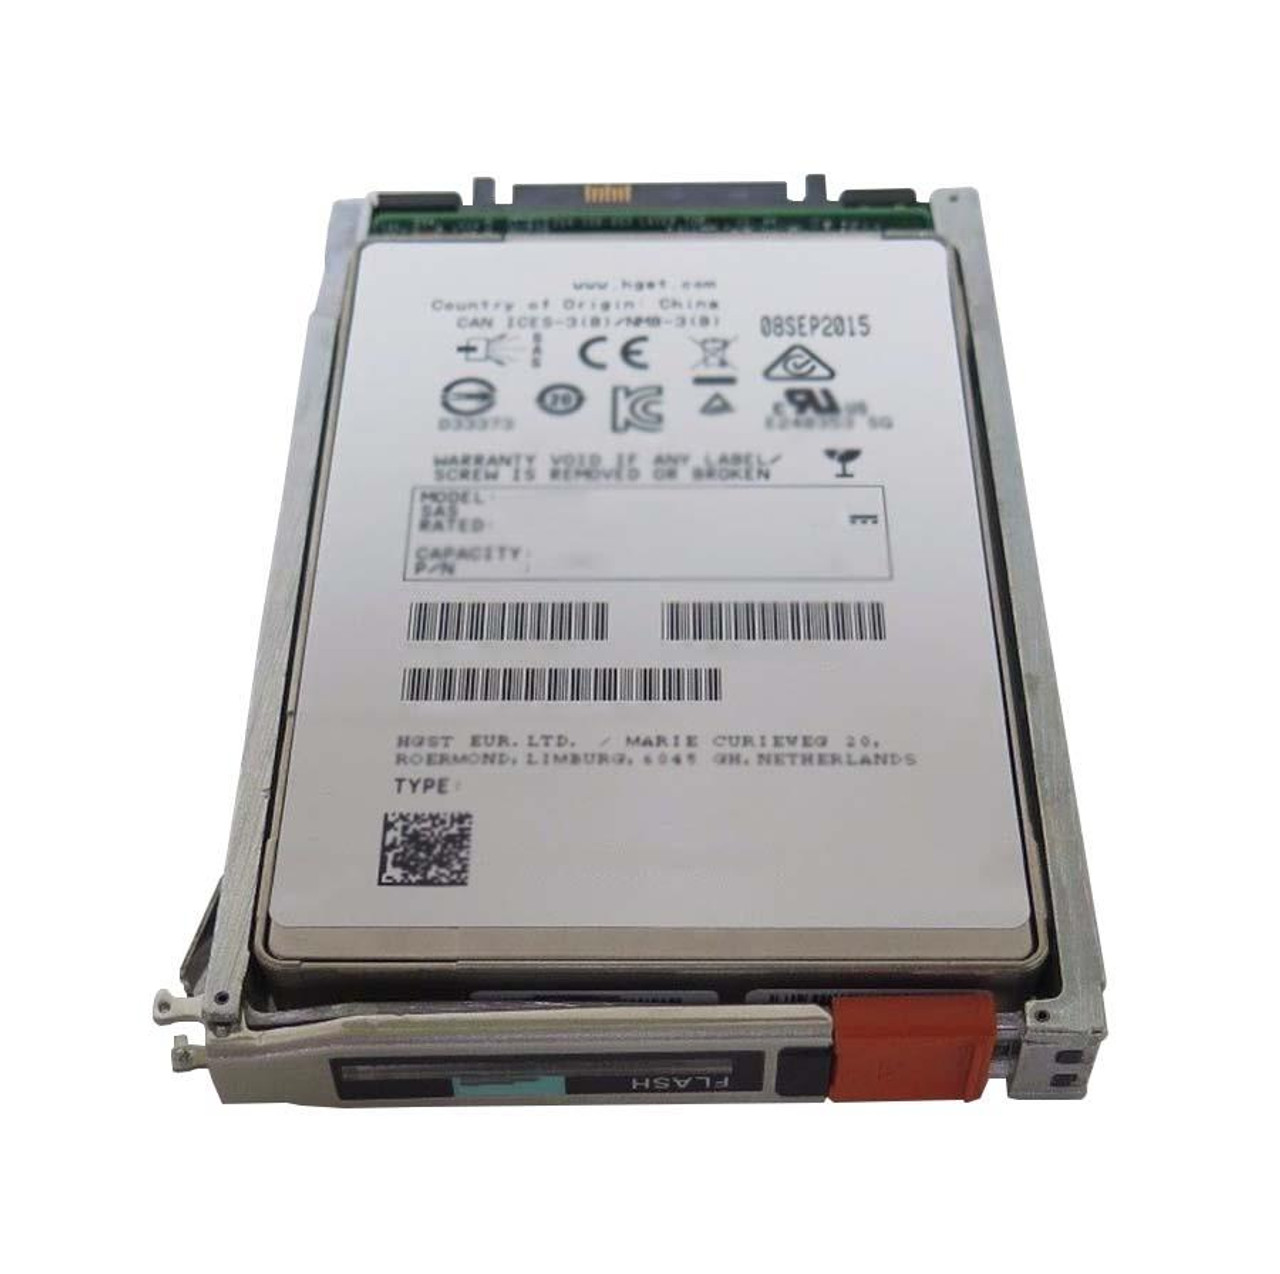 V4-D2S6FXL-1600 EMC 1.6TB SAS 12Gbps 2.5-inch Internal Solid State Drive (SSD)